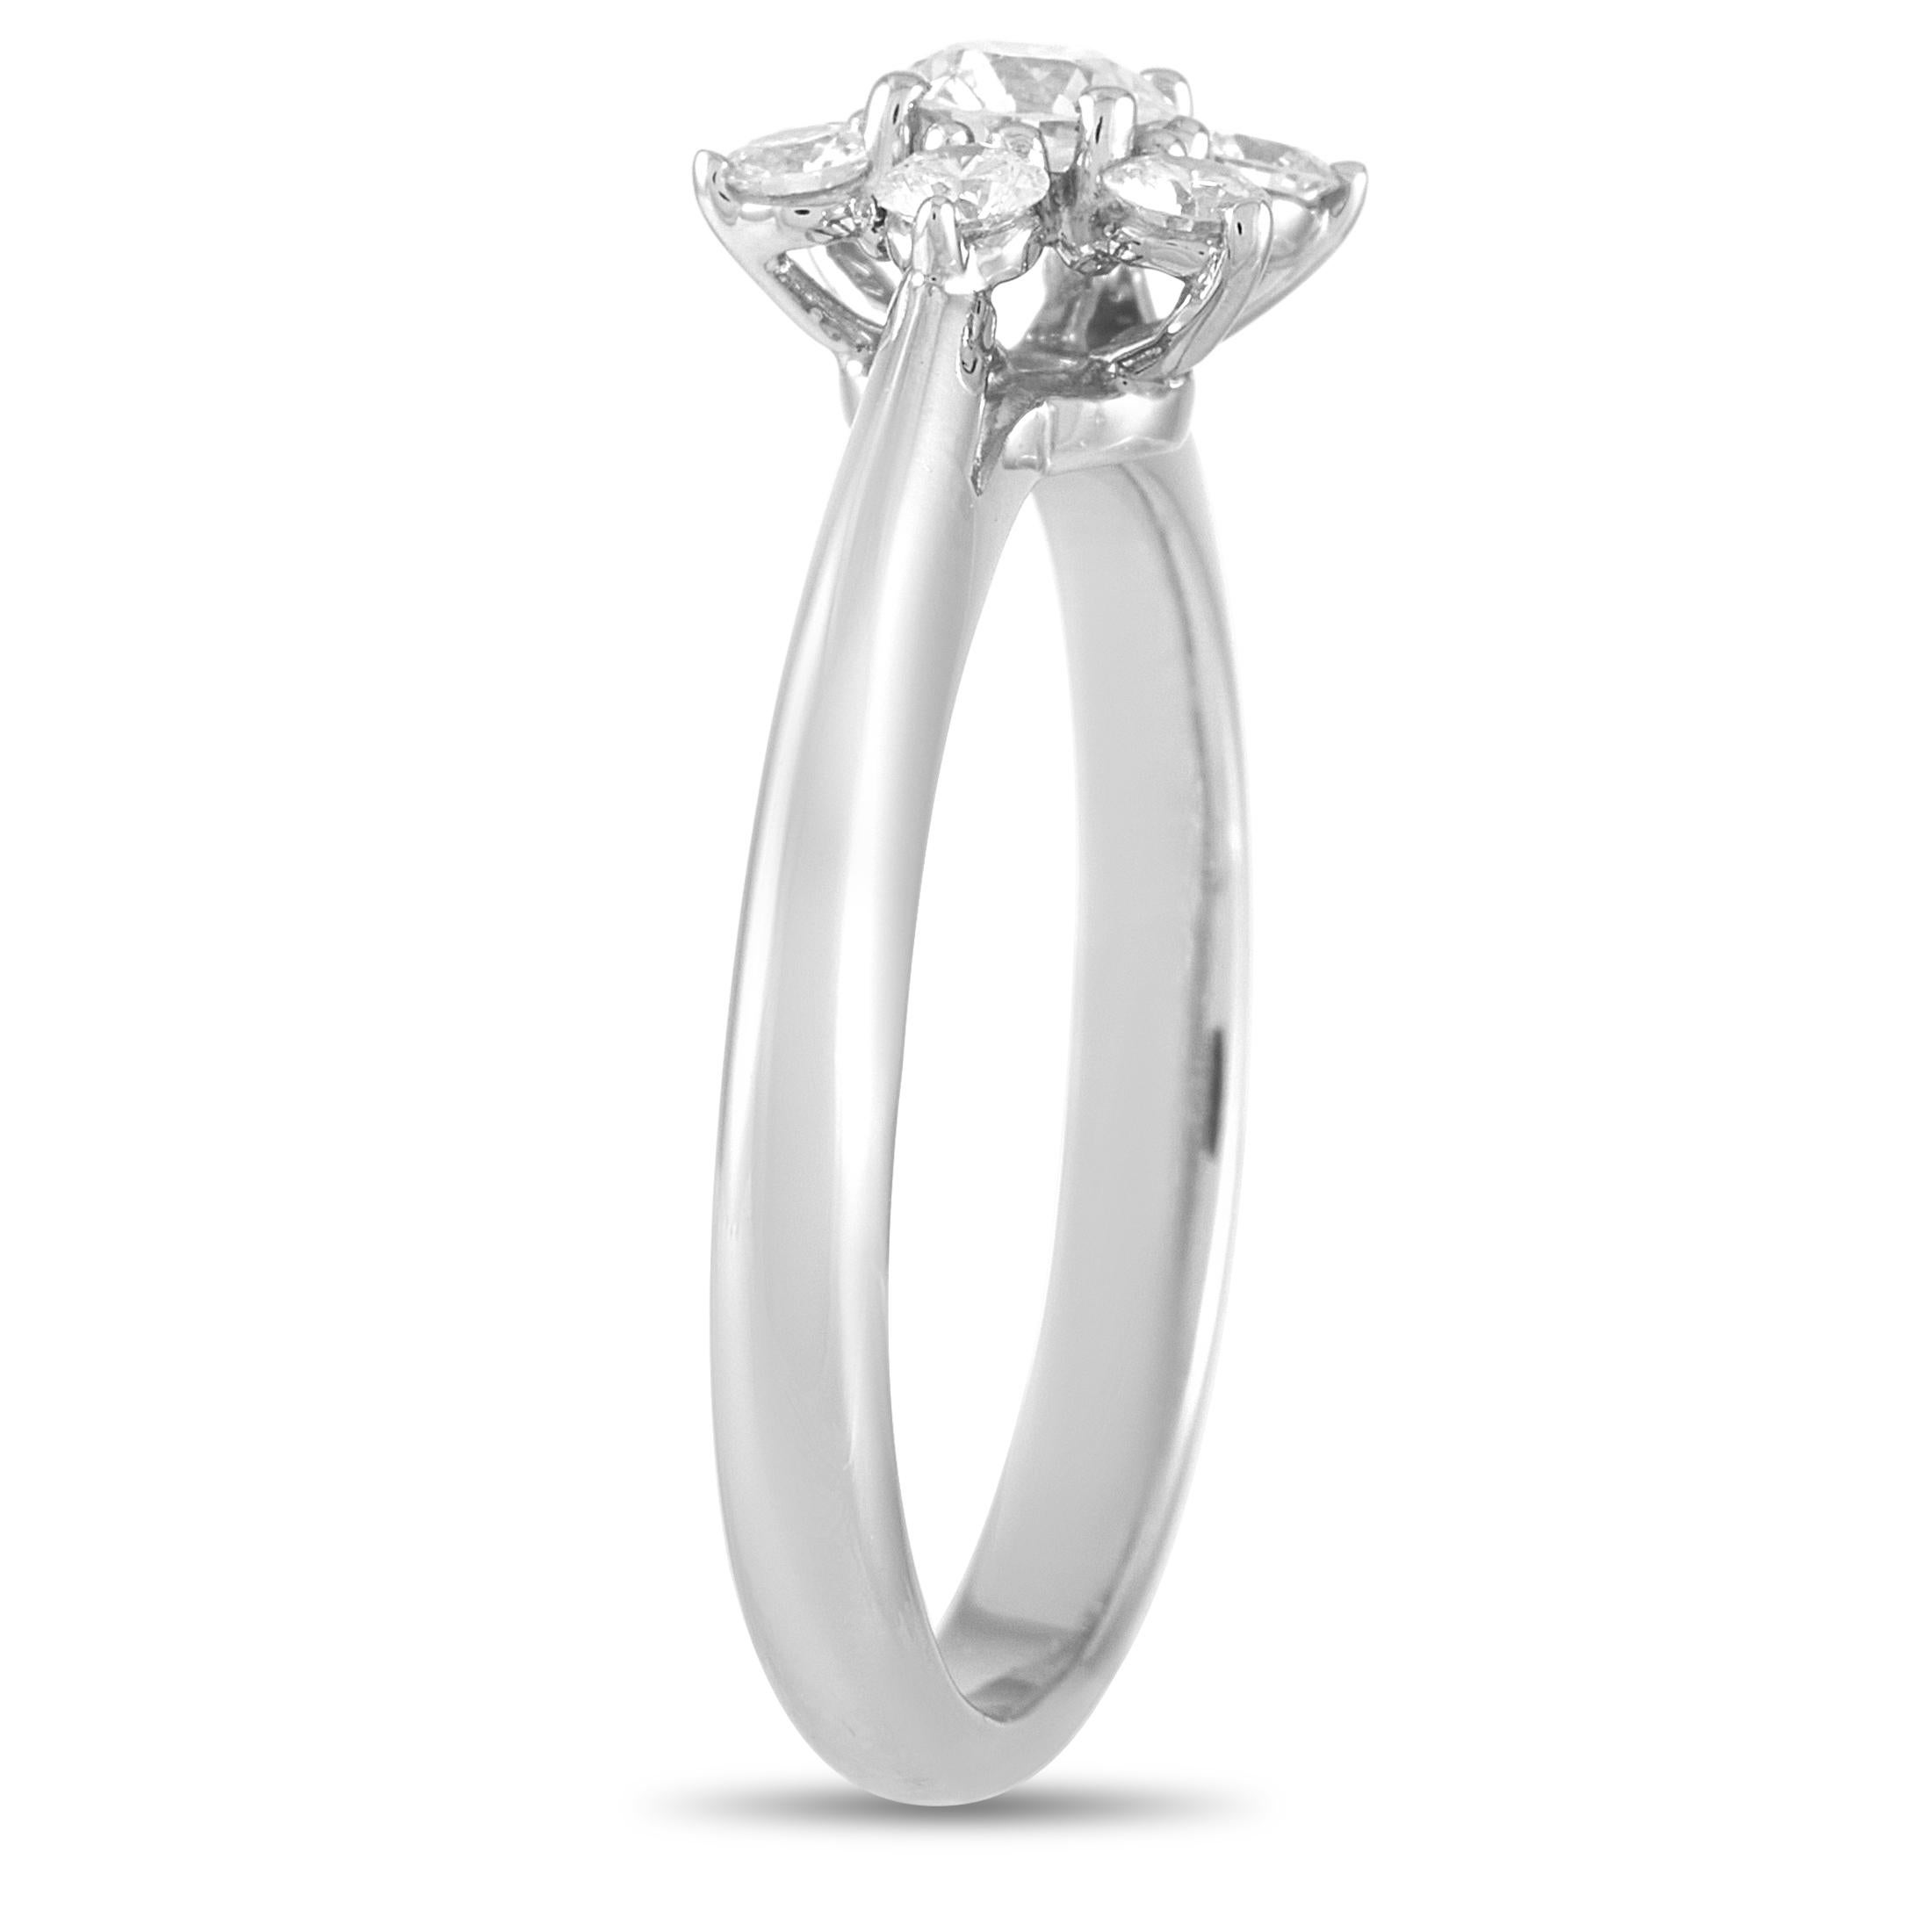 The Tiffany & Co. Platinum 0.50 ct Diamond Flower Cocktail Ring blooms with graceful beauty. A center diamond surrounded by six shimmering diamond petals makes up the chic centerpiece of this ring. The band measures 2mm thick and tapers toward the